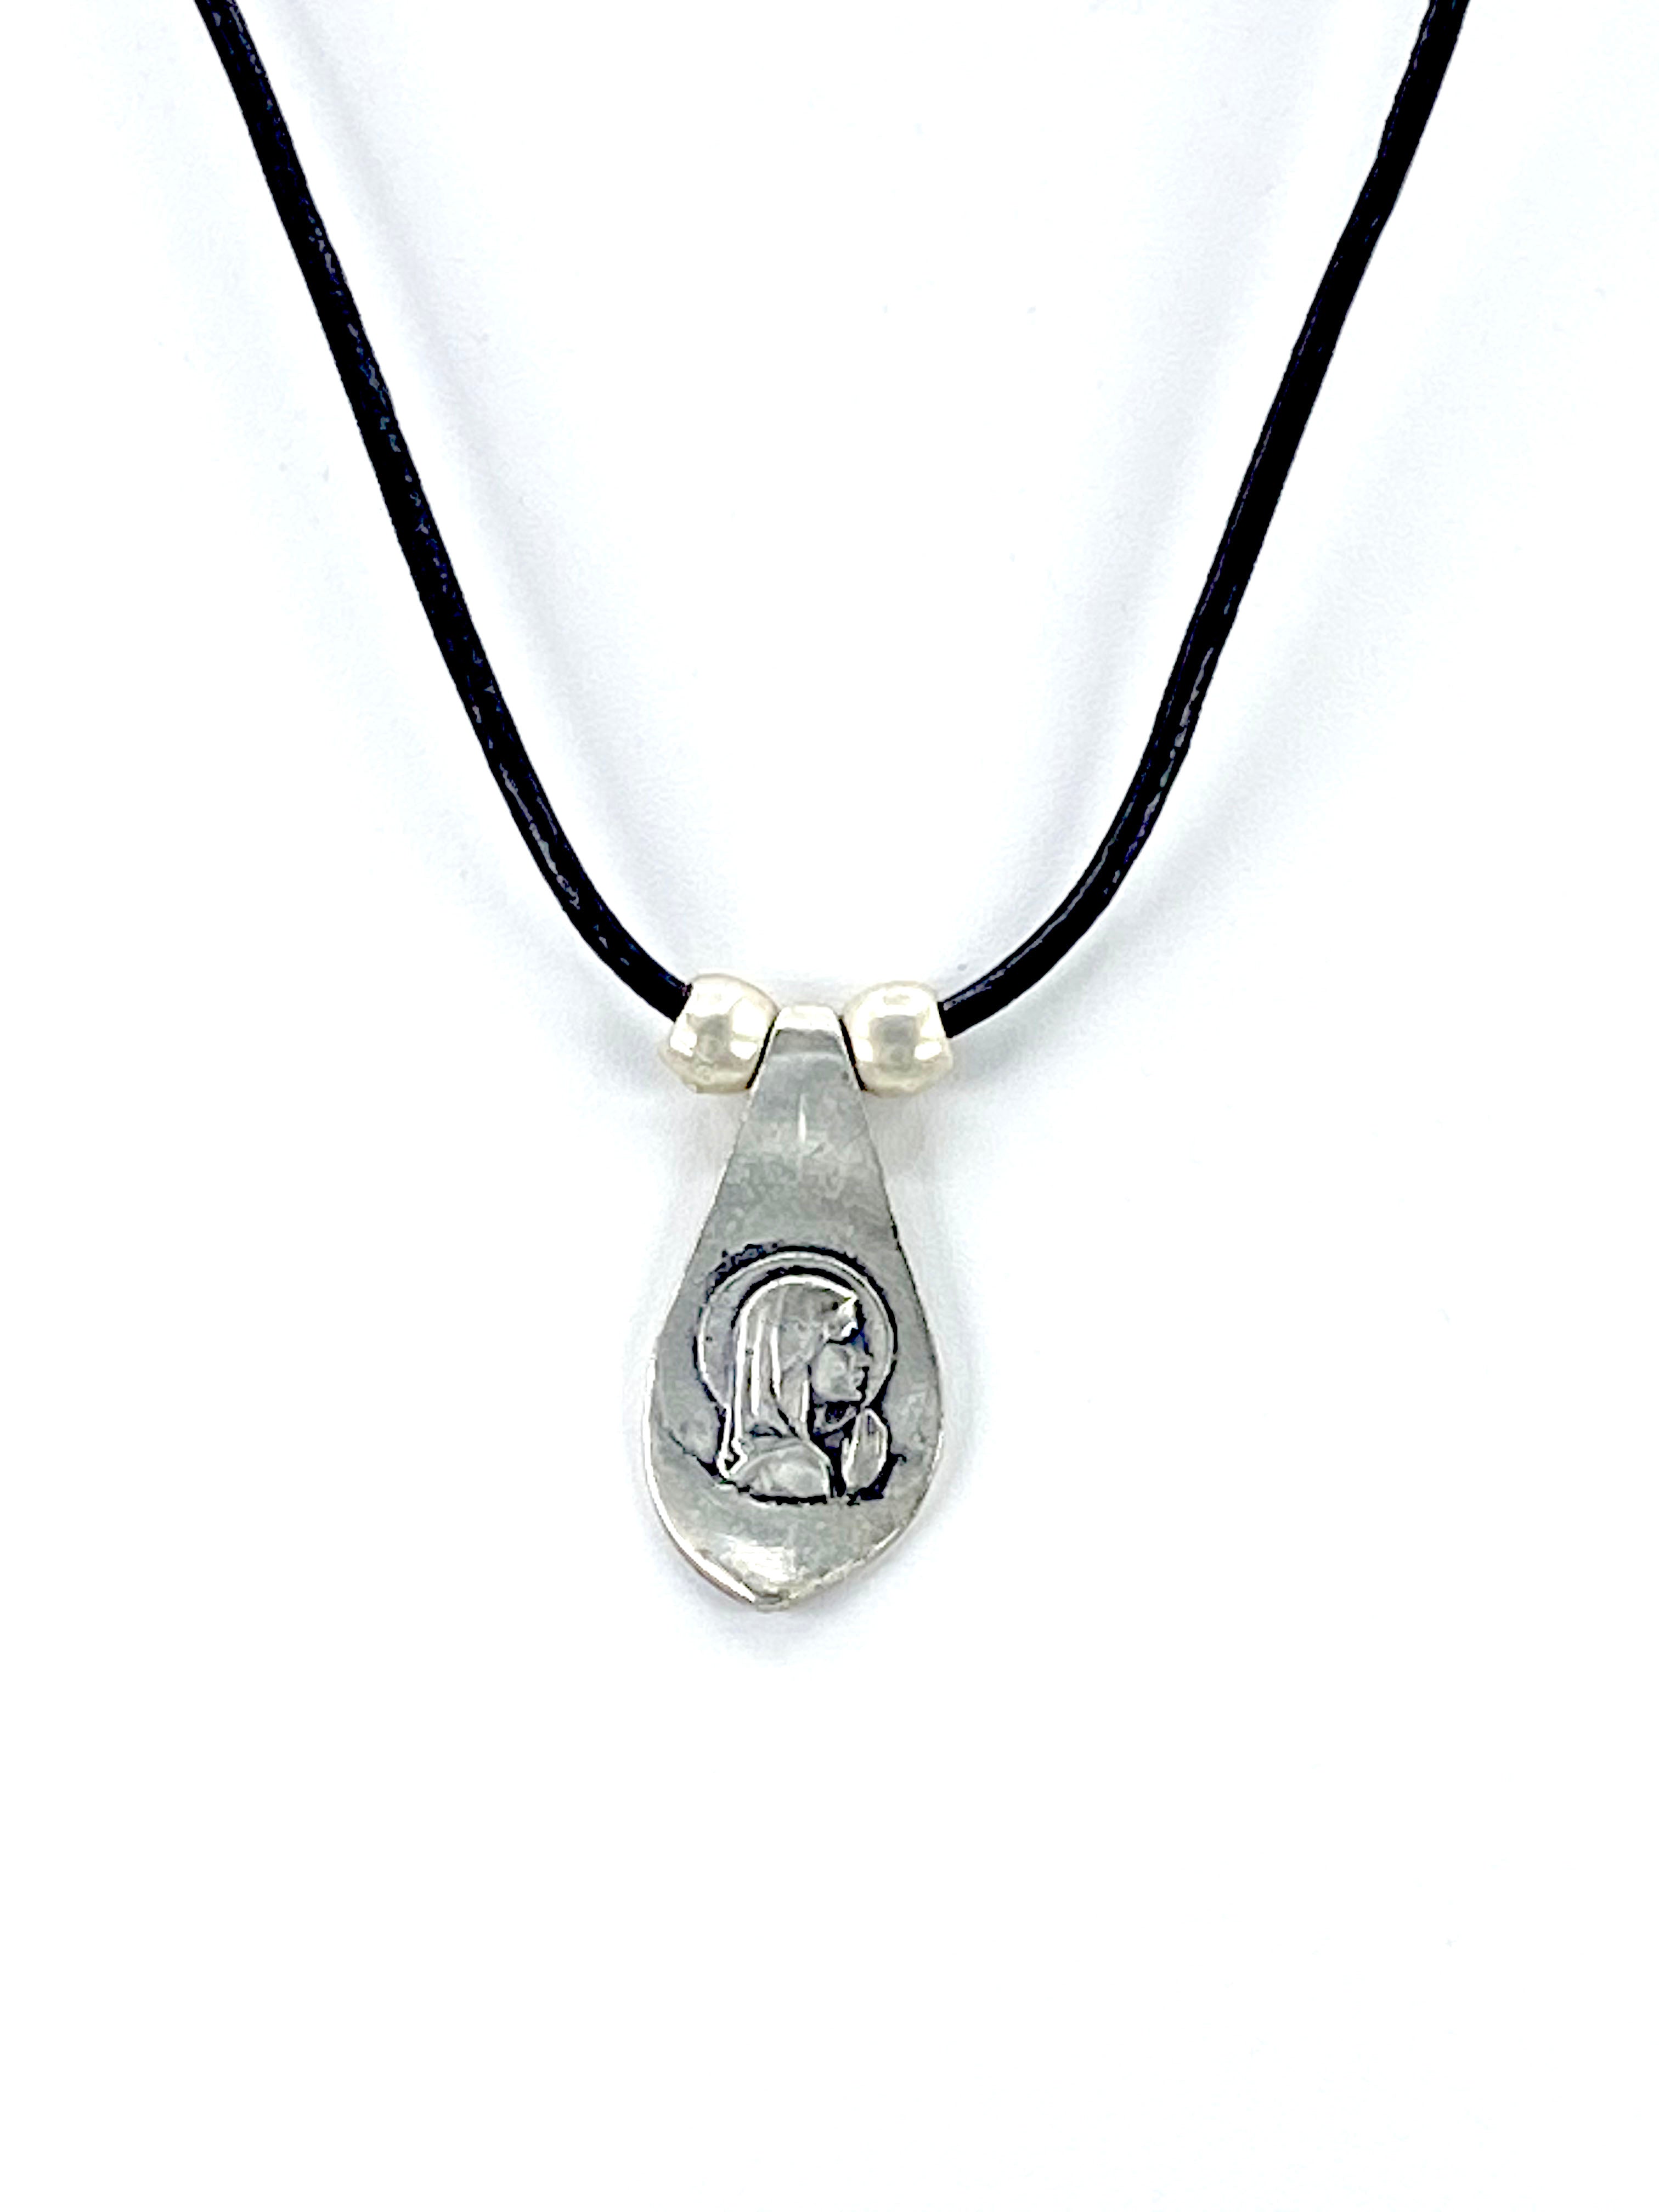 Vintage Virgin Mary Necklace  Handmade Jewelry with Genuine Leather Straps by Graciela's Collection